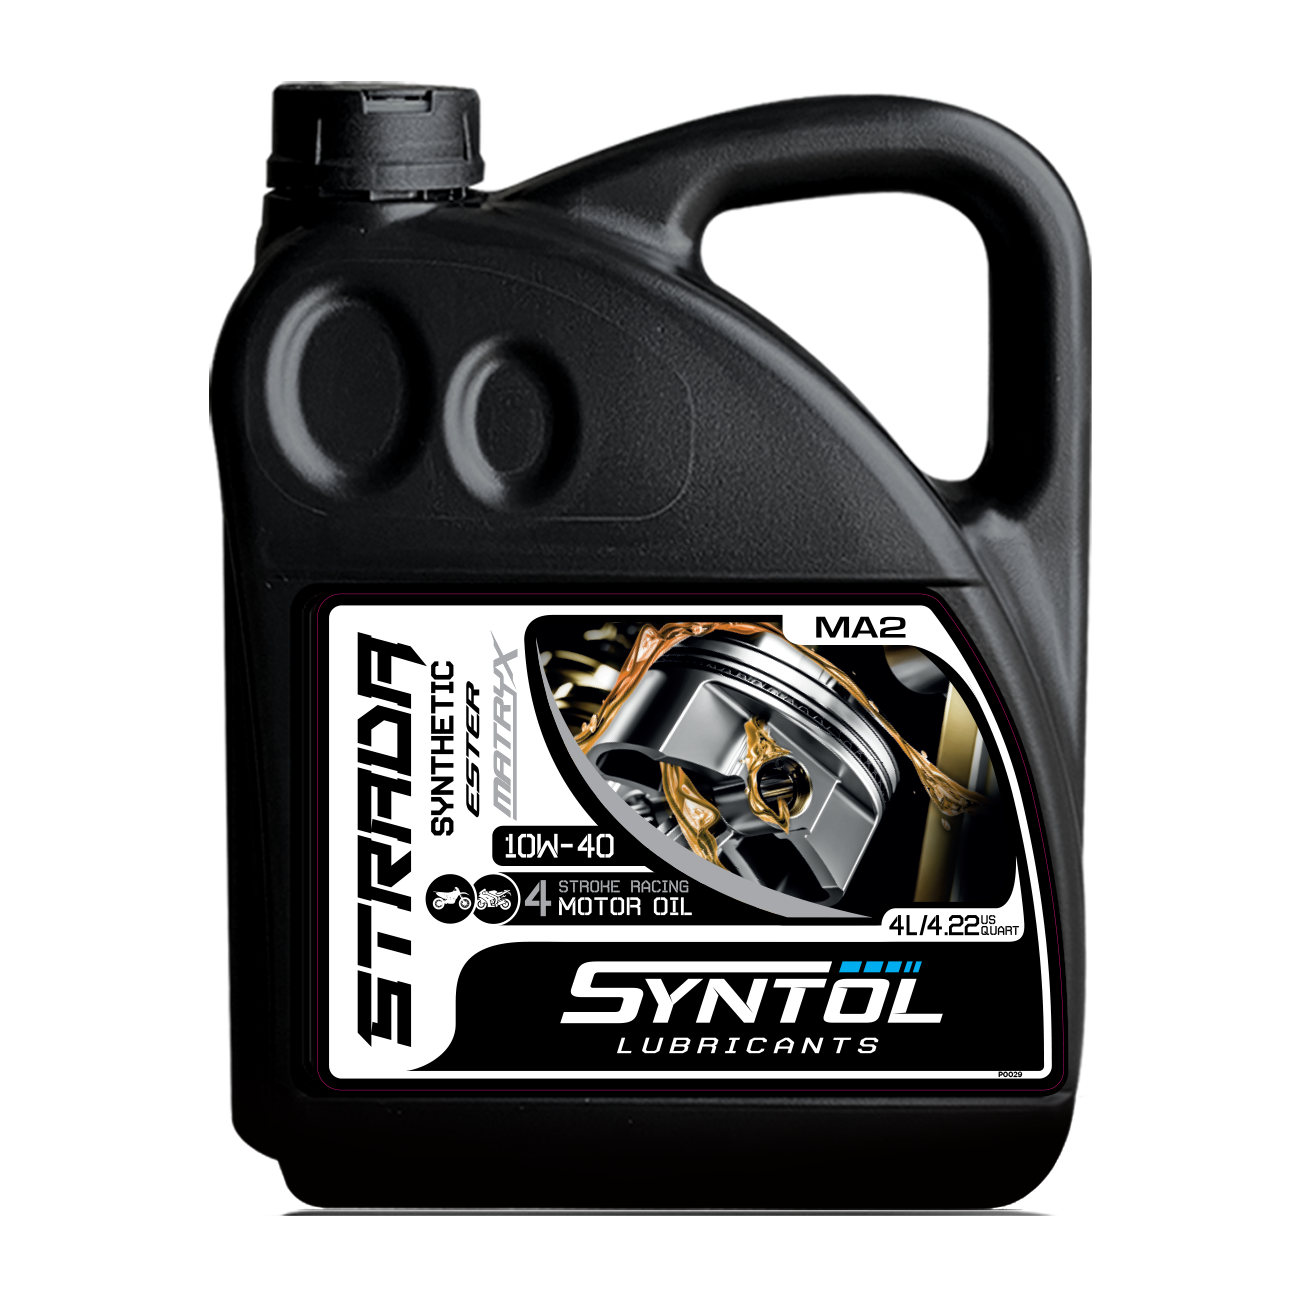 Syntol Strada 4T 10W-40 Motorcycle Engine Oil - 4 Litre-F0041-4-Oils and Lubricants-Pyramid Motorcycle Accessories